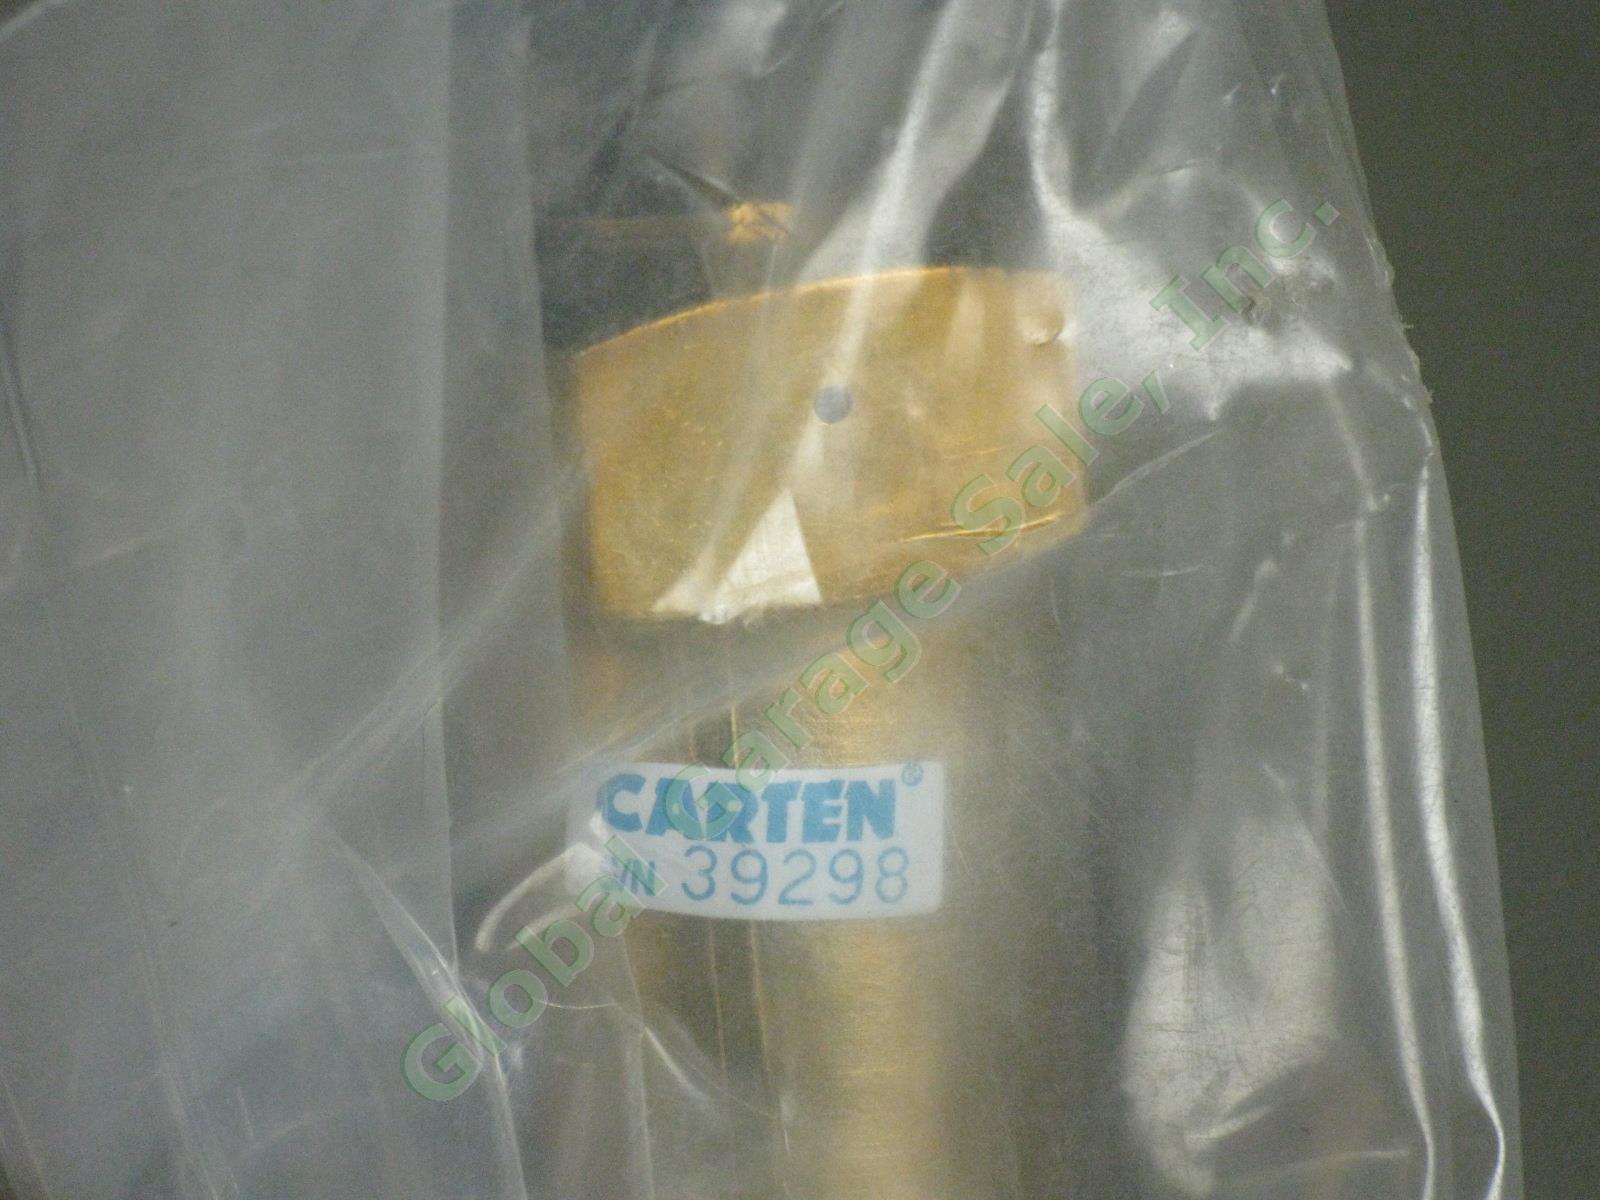 NEW NOS Carten UHP Ultra High Purity 1" OD Butt Weld Stainless Steel Tube Valve 5